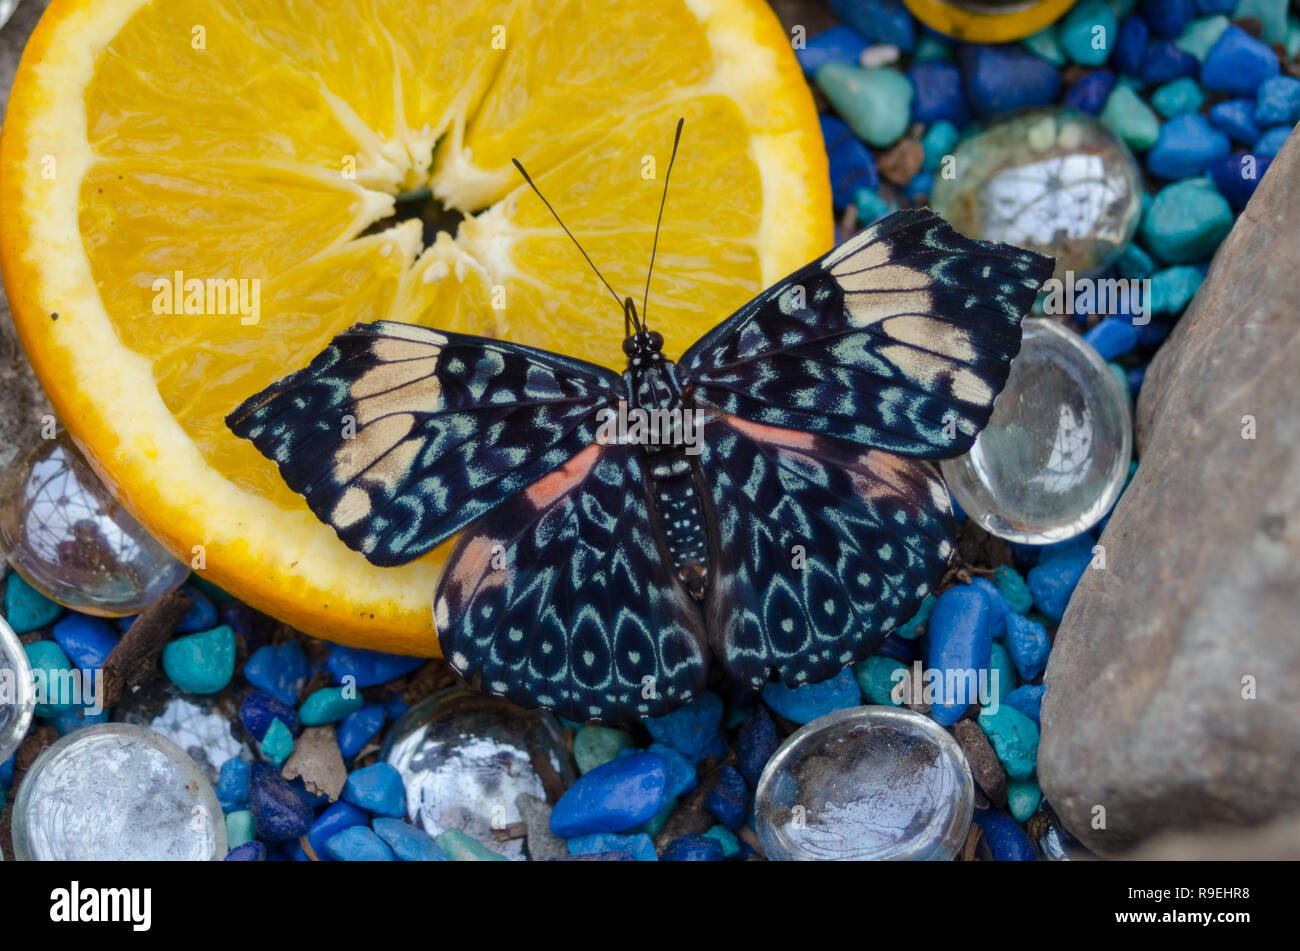 Blue Cracker (Hamadryas arinome) butterfly on an orange slice surrounded by blue pebbles.  Crackers are a Neotropical group of medium size butterfly Stock Photo